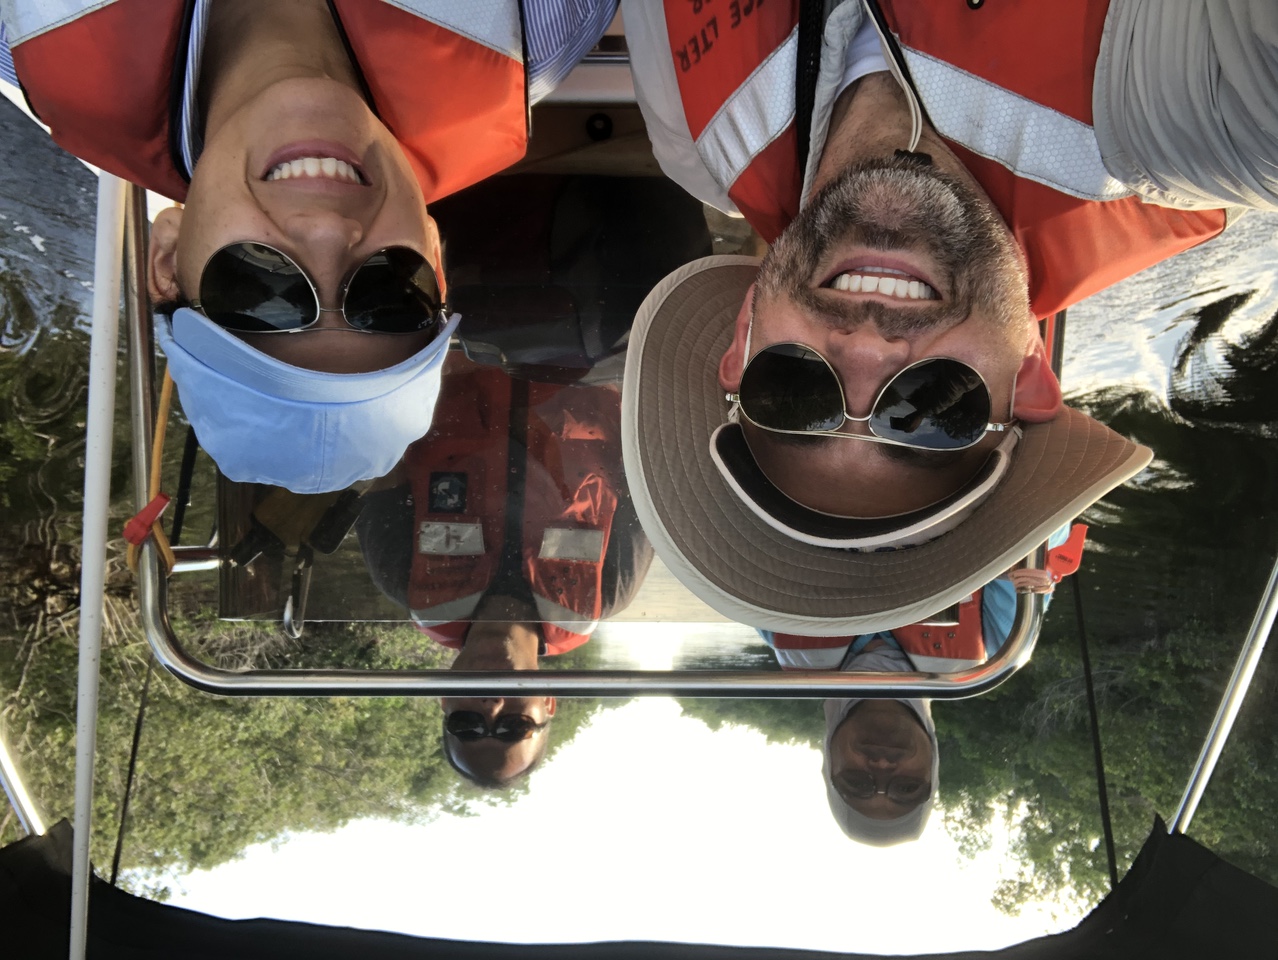 Nick Oehm and Leslie Nisbet traveling to Shark River in Everglades National Park to collect LTeaER bags deployed at SRS 4-6